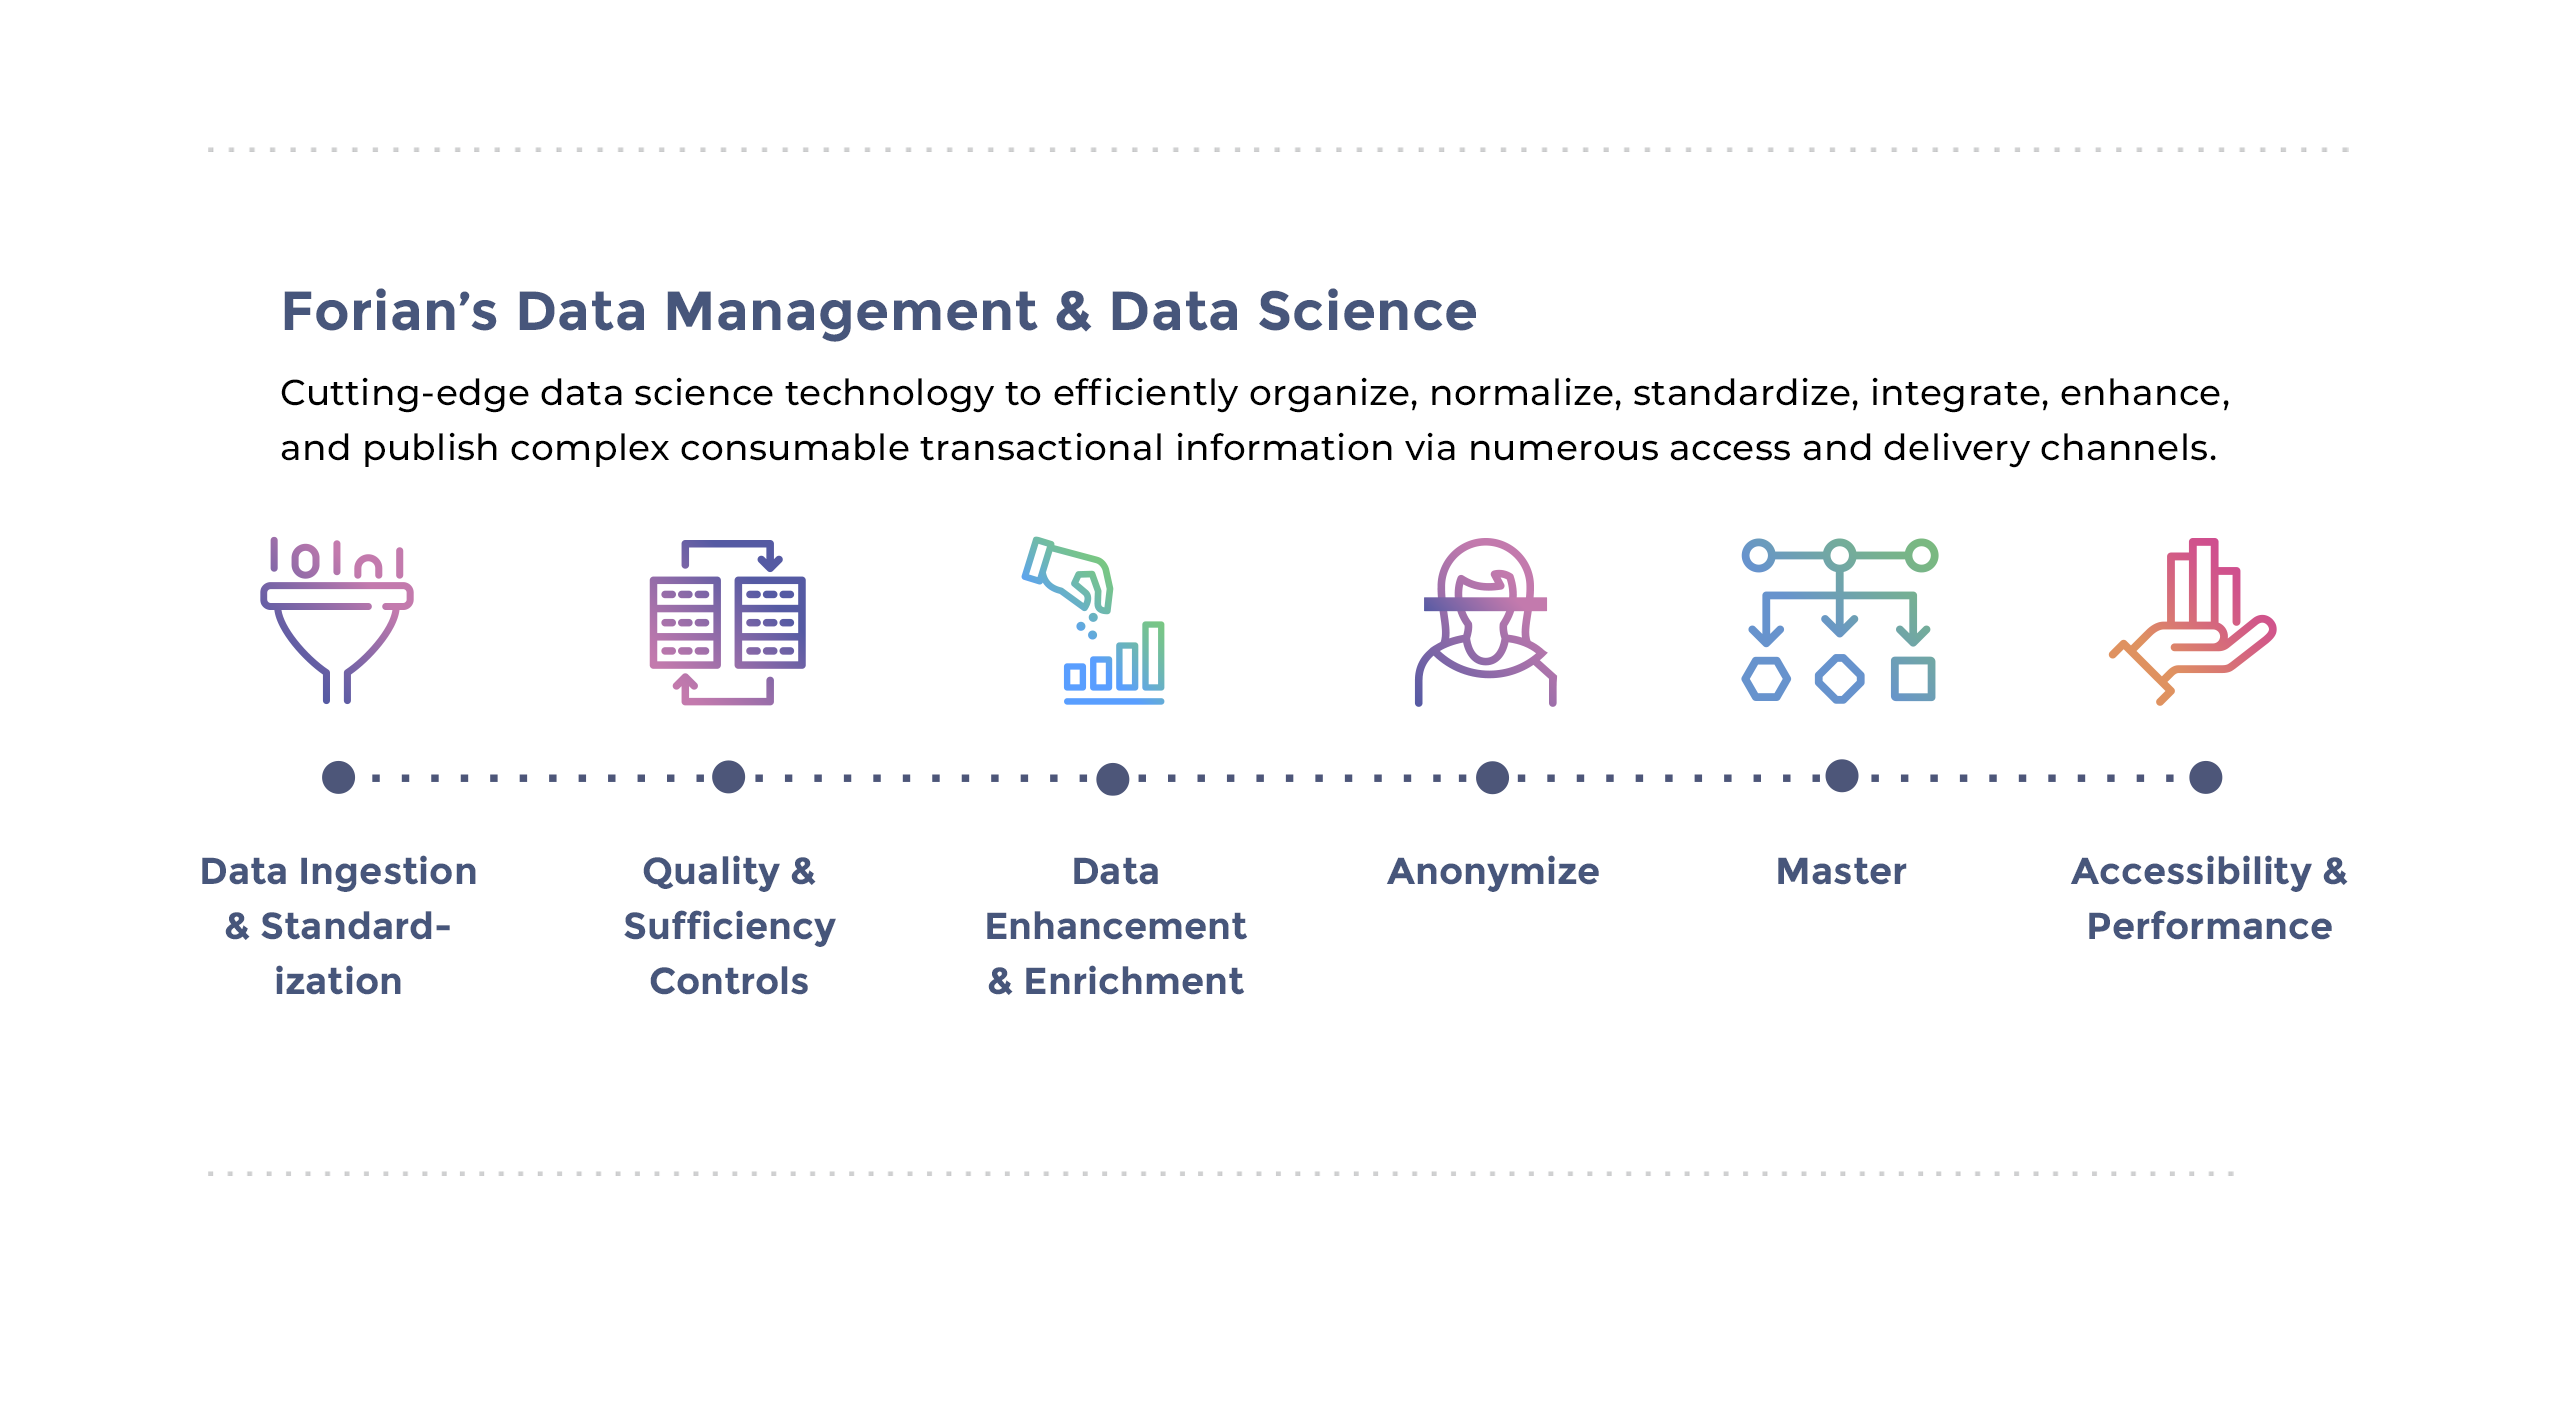 Cutting-edge data science technology to efficiently organize, normalize, standardize, integrate, enhance, and publish complex consumable transactional information via numerous access and delivery channels.